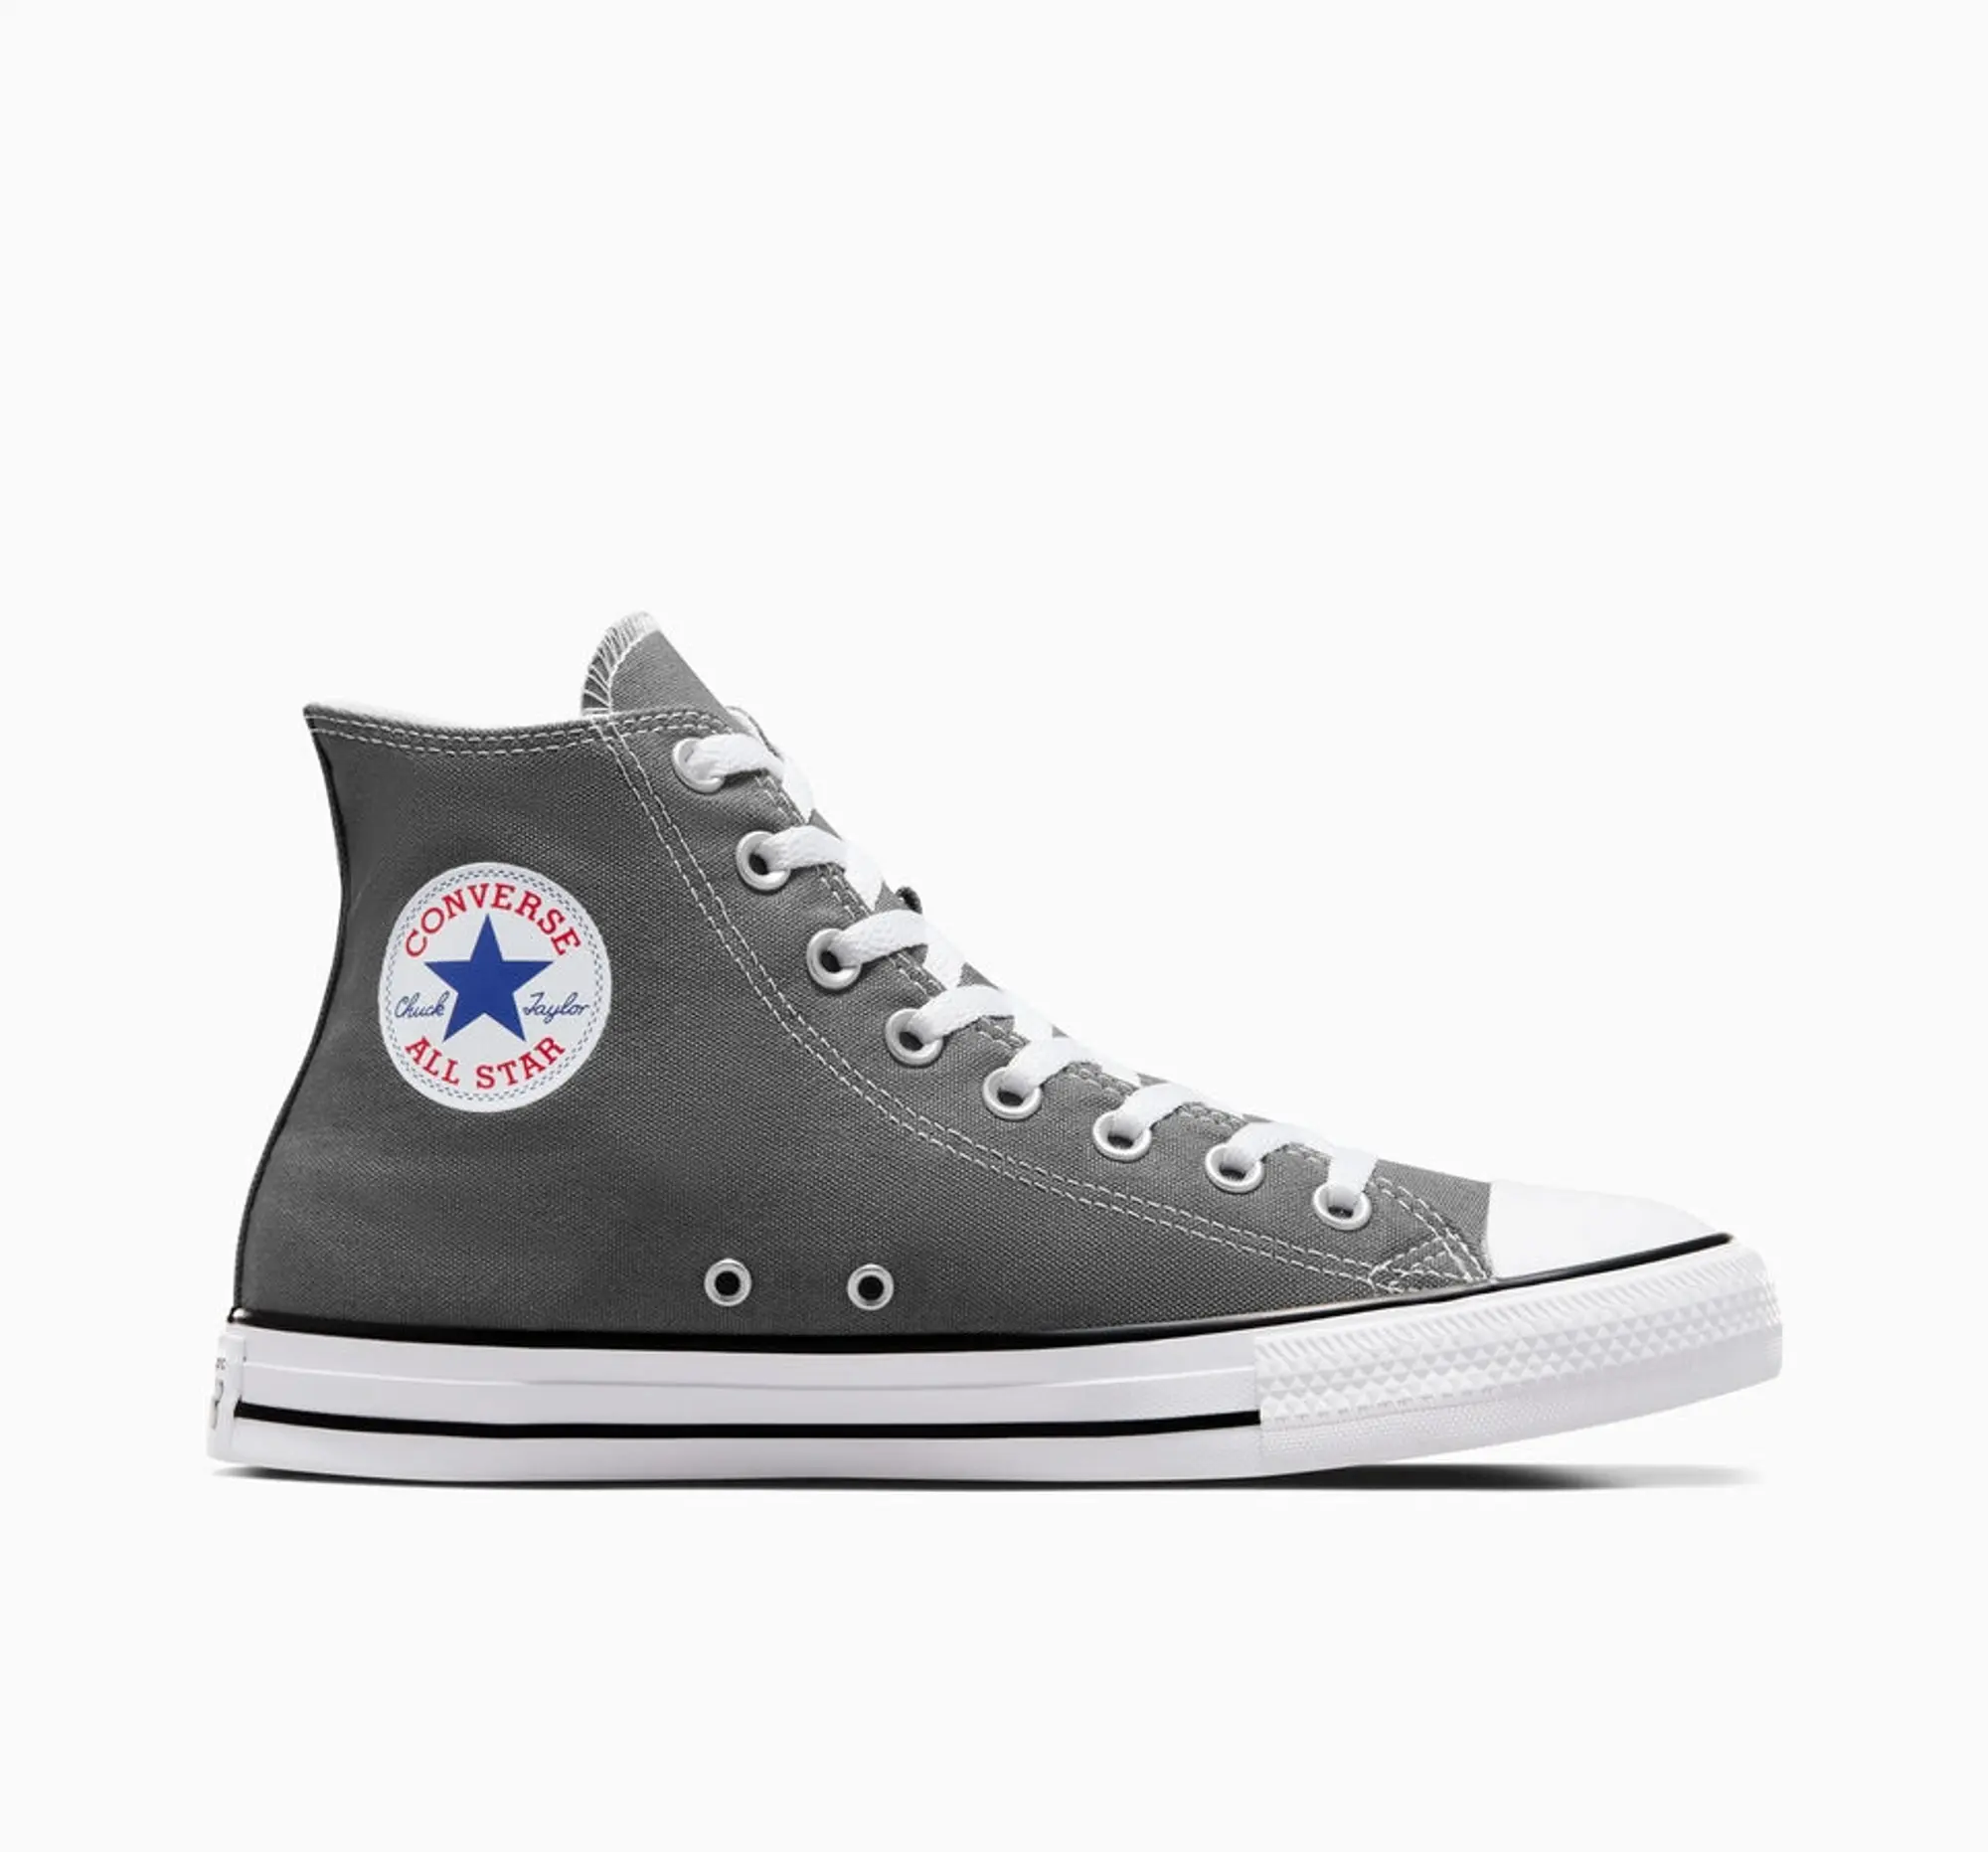 Converse chuck taylor all star hi trainers in grey